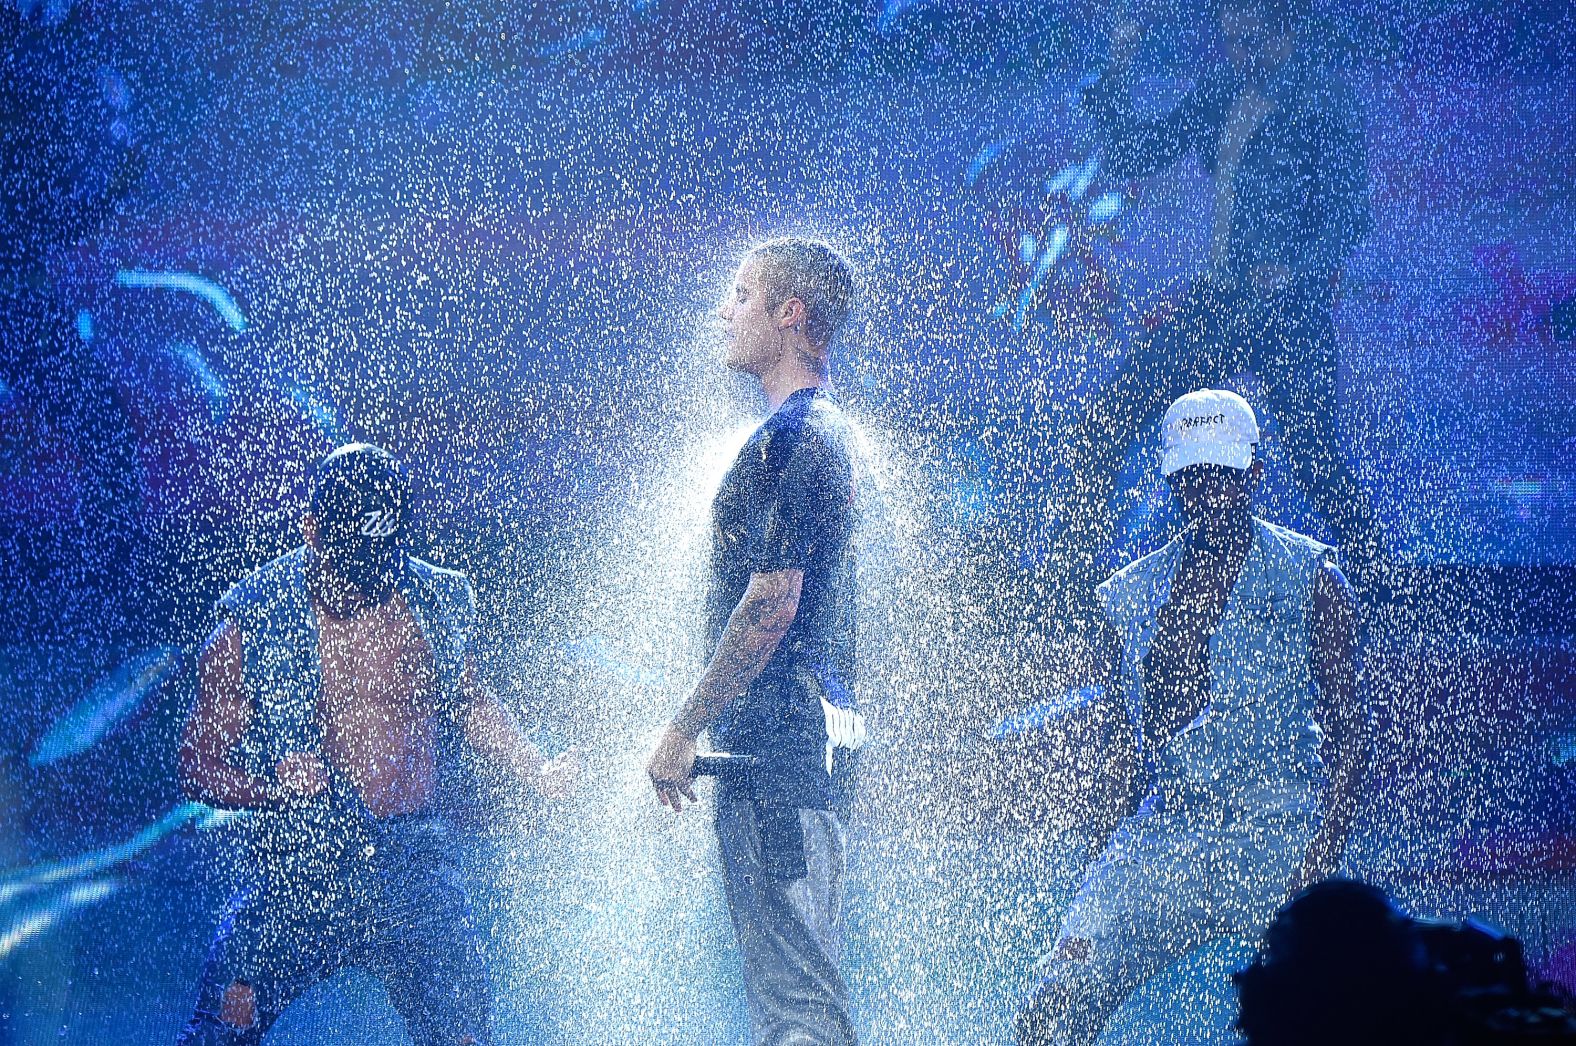 Bieber performs on stage during his "Purpose" tour in July 2016. He ended the tour early in 2017, <a href="https://www.cnn.com/2017/07/24/entertainment/justin-bieber-tour-canceled/index.html" target="_blank">canceling some dates</a> because of "unforeseen circumstances."